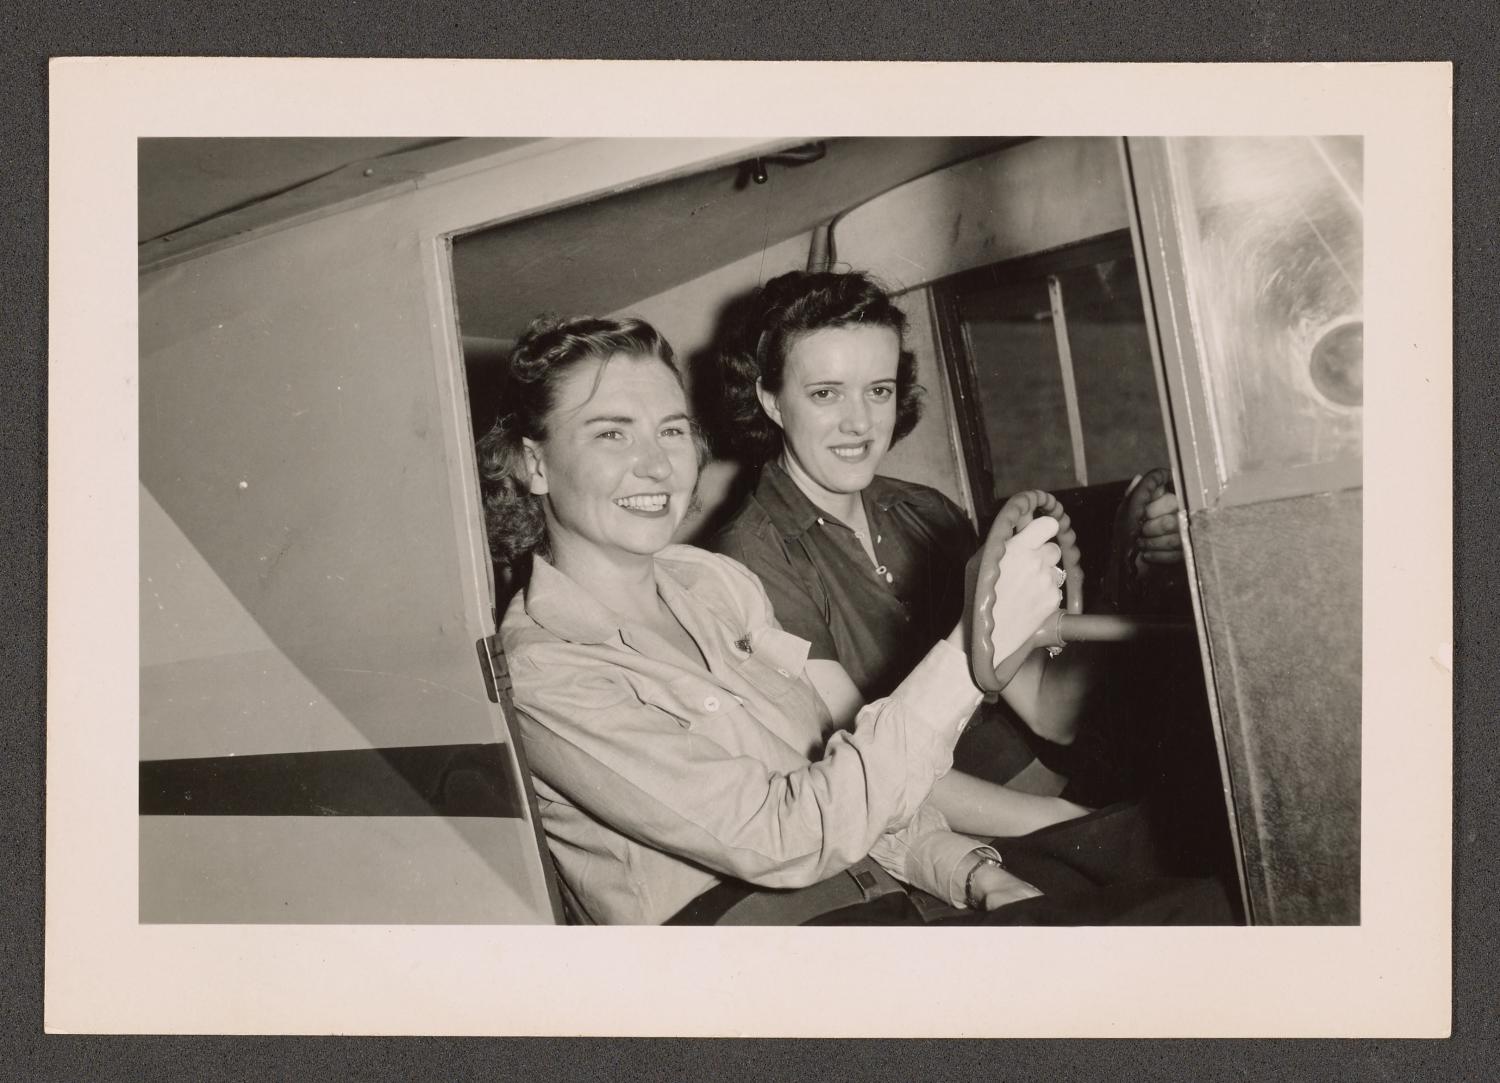 [2 Smiling Women in Plane Cockpit]
                                                
                                                    [Sequence #]: 1 of 2
                                                